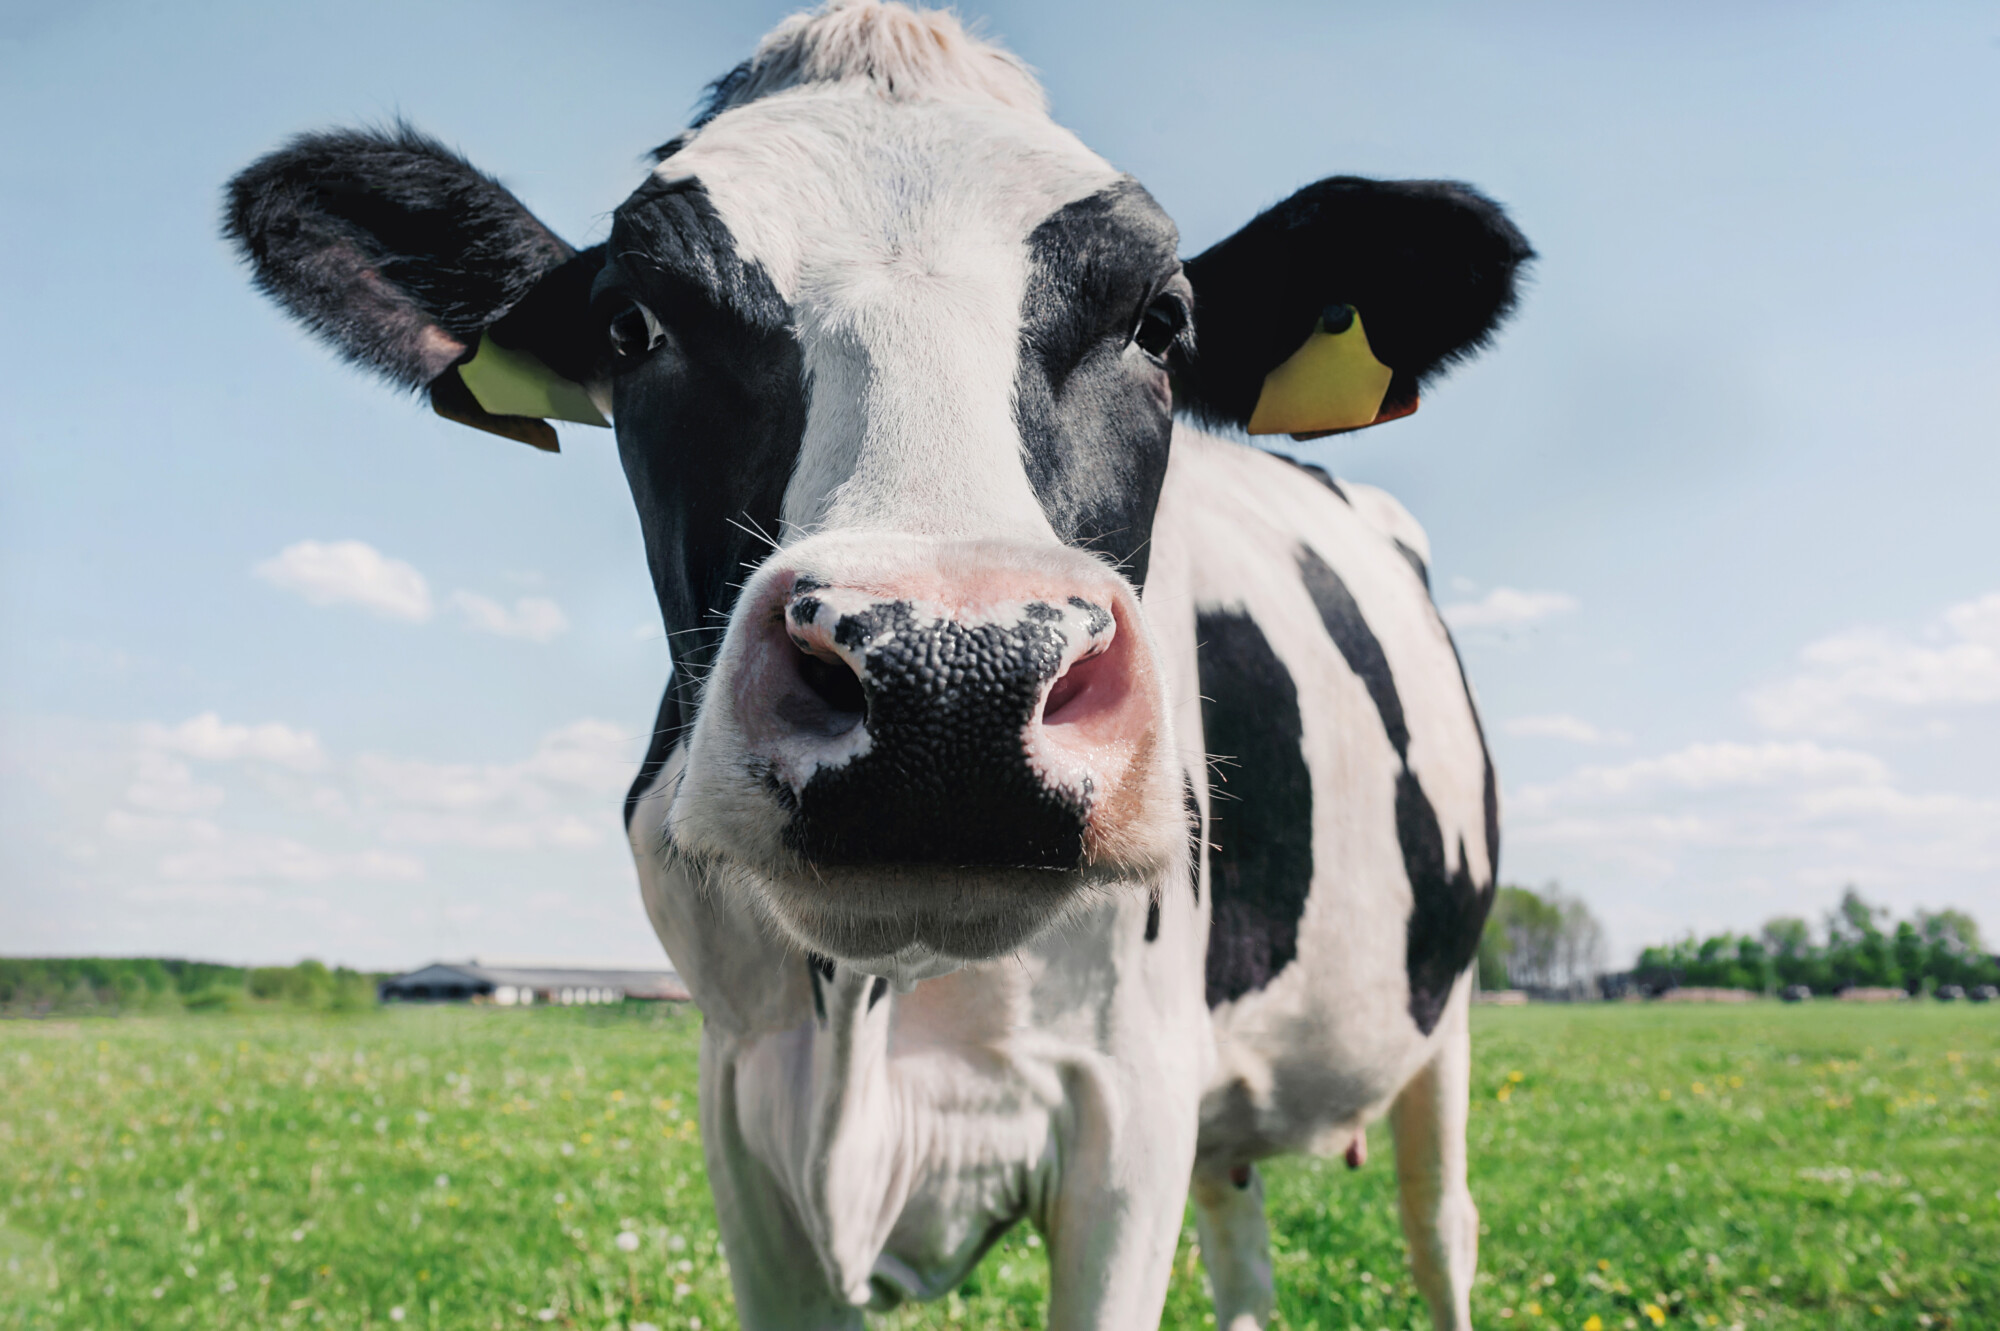 dairy and beef cow in a green field with blue sky - health market report